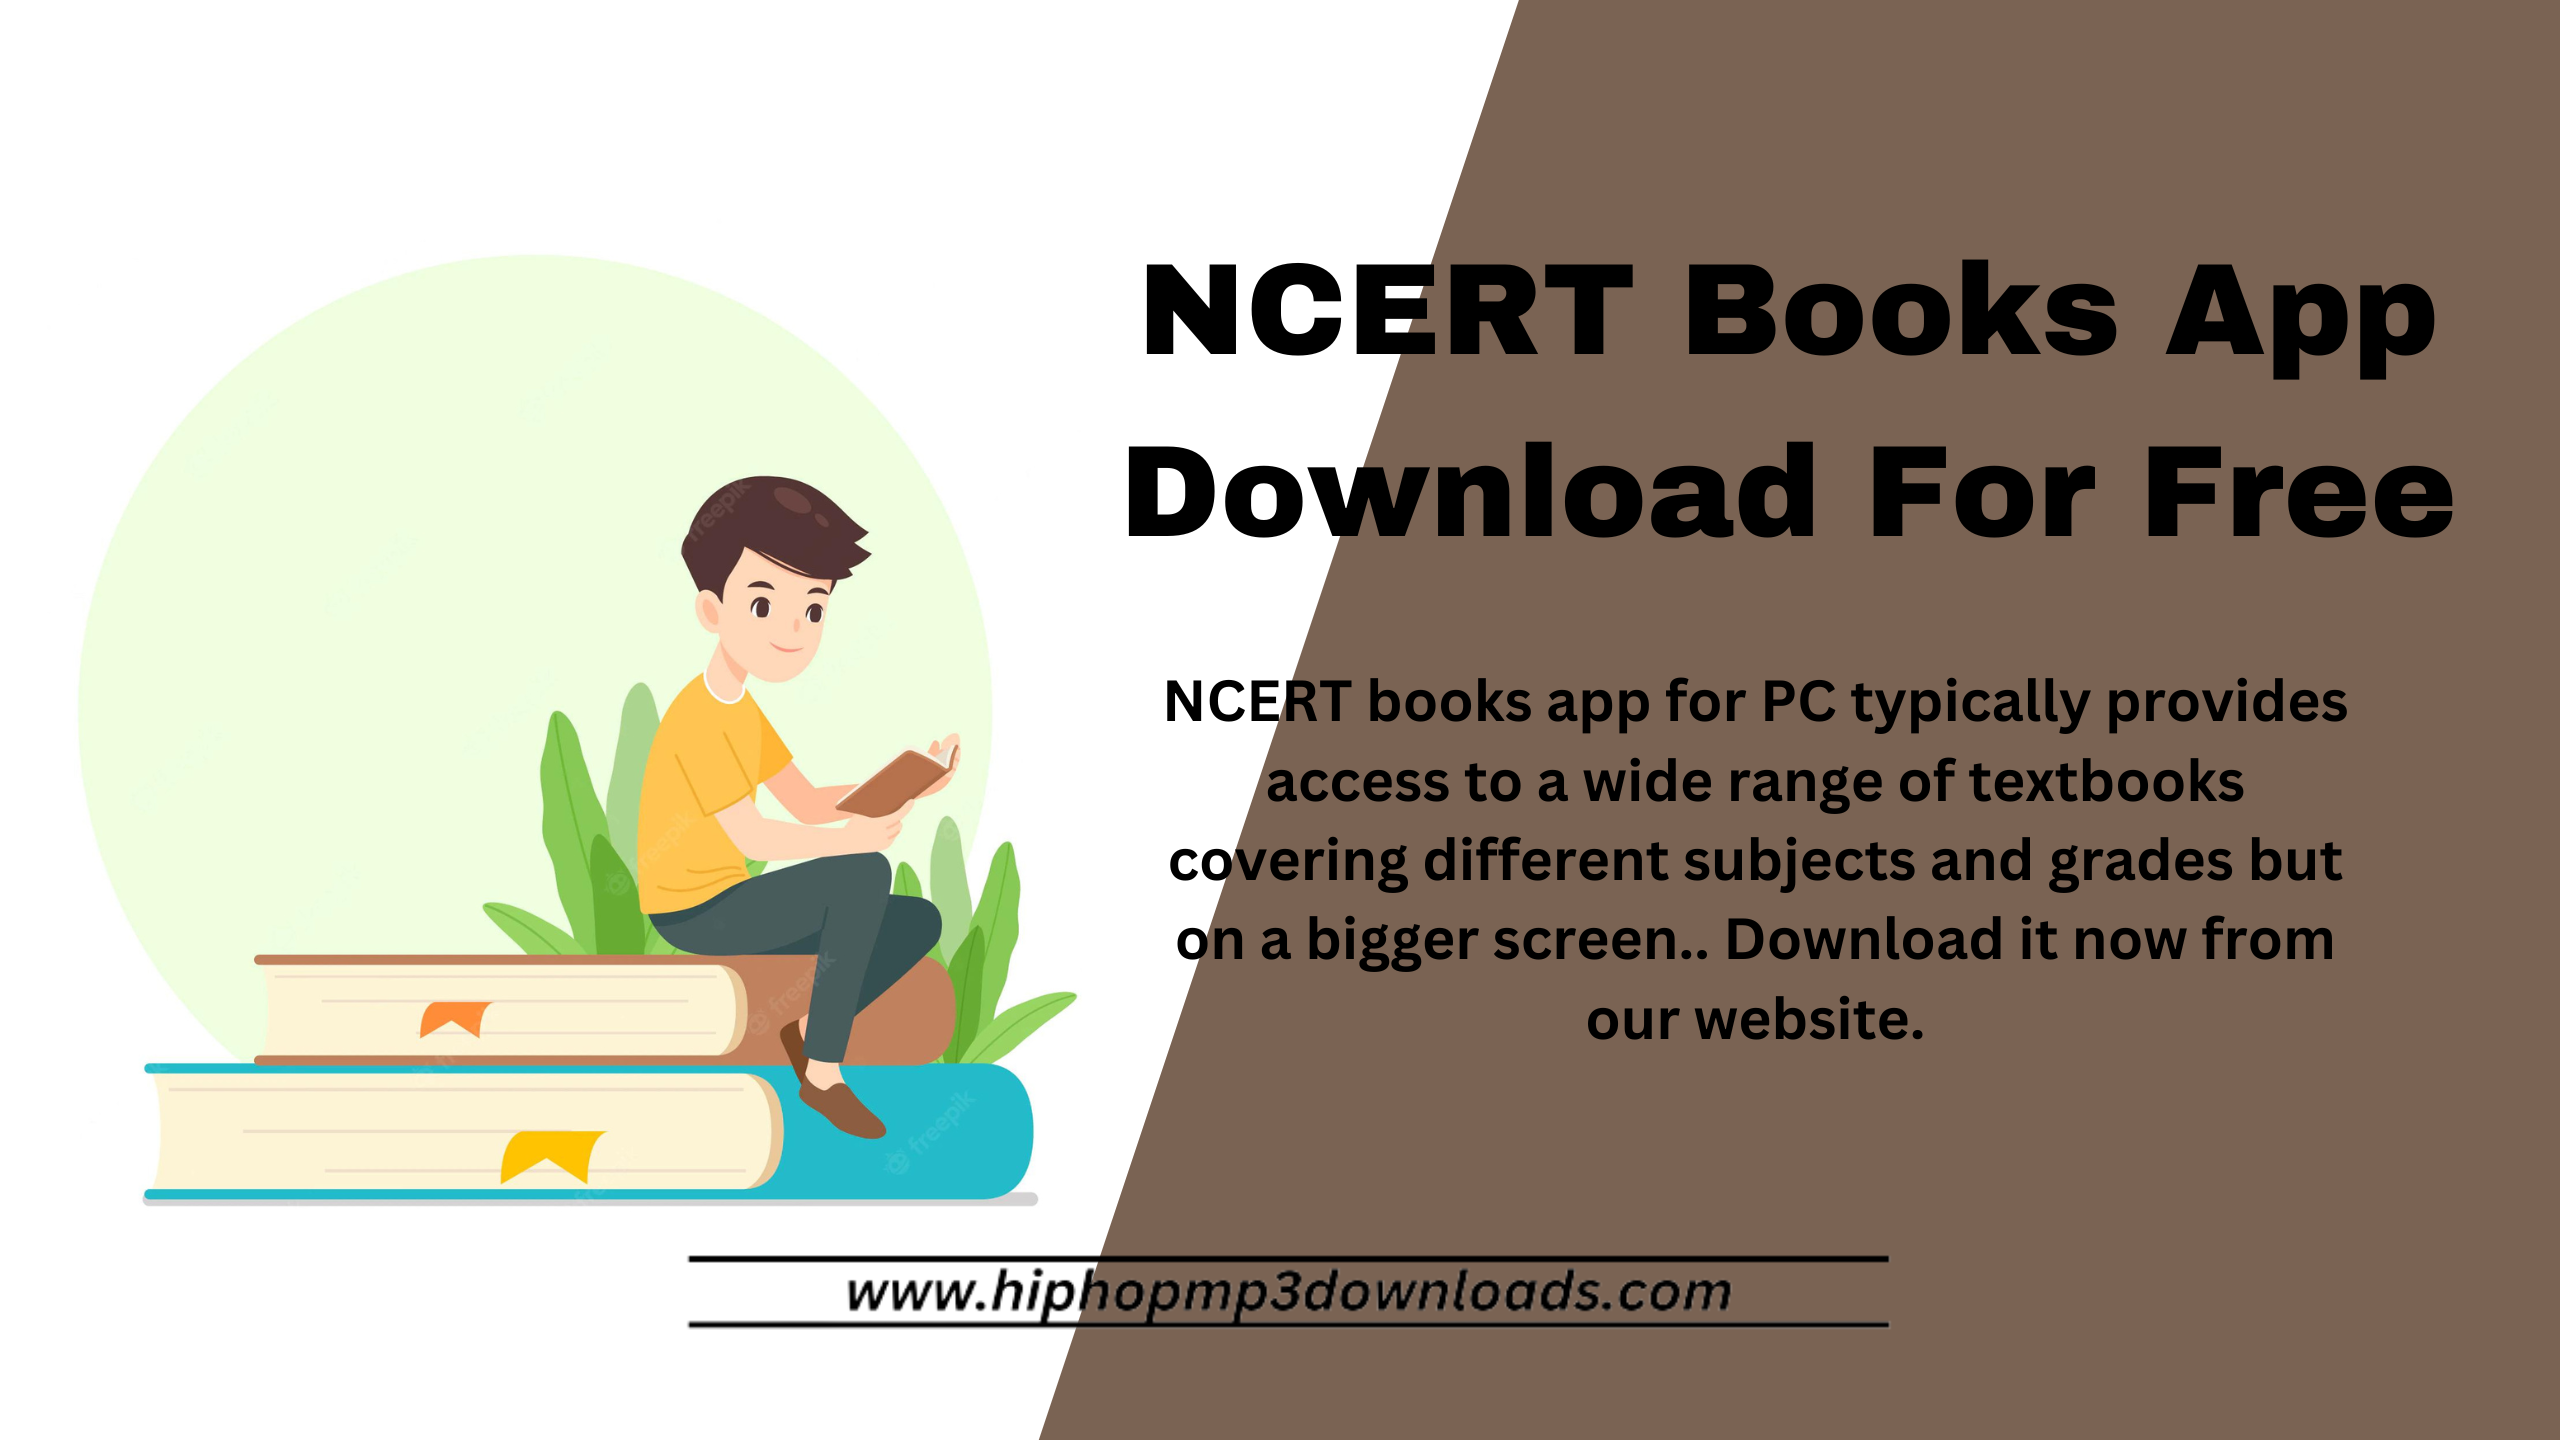 NCERT Books App Download For Free